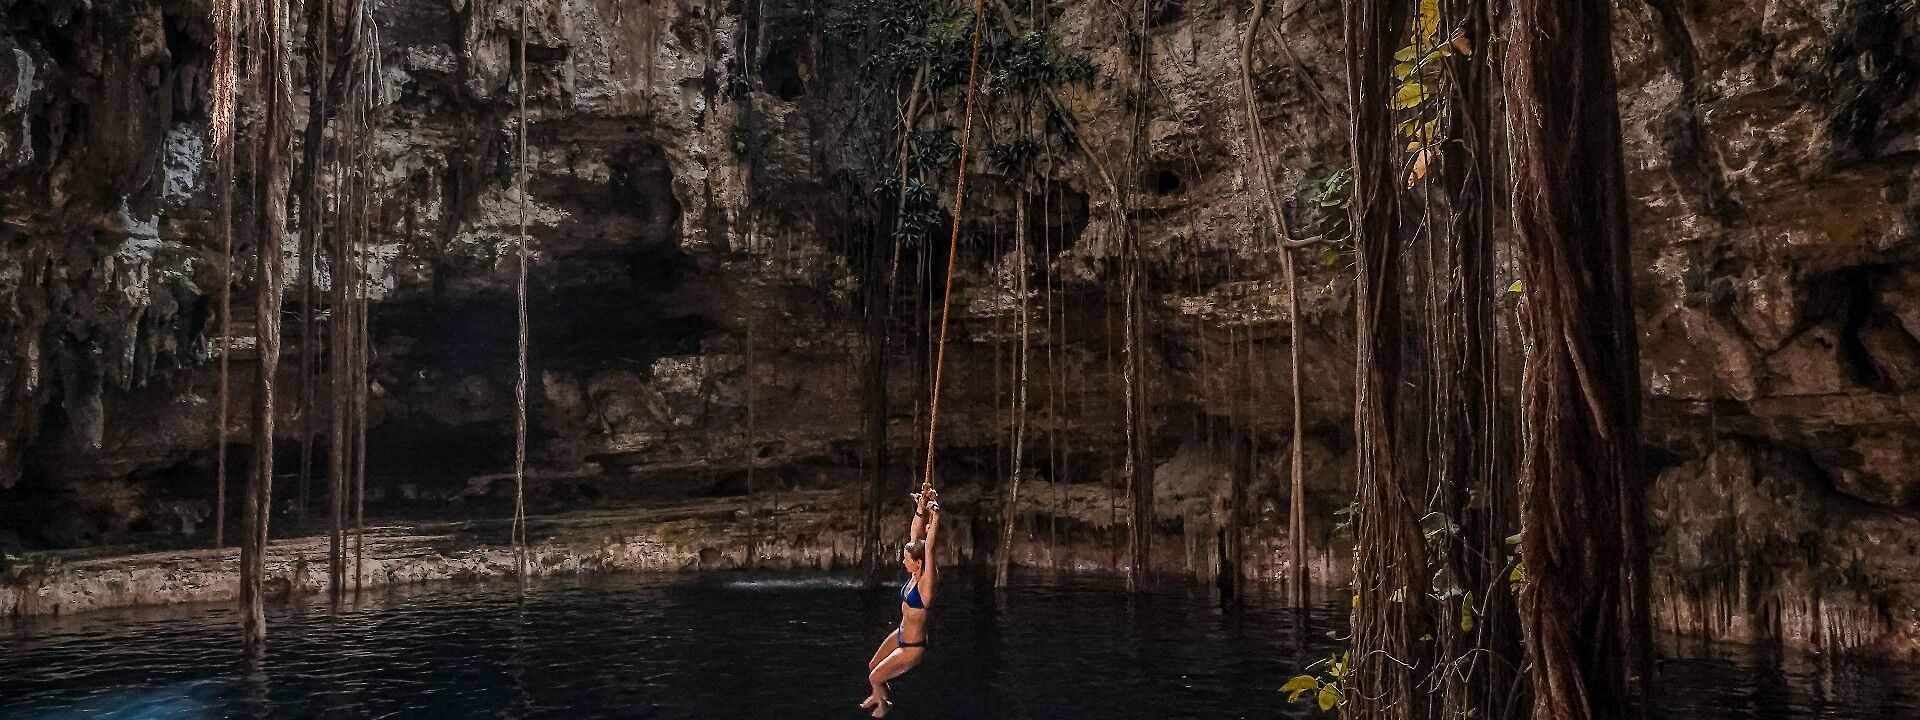 Swinging on a vine over a cenote, Mexico. Unsplash: The free birds